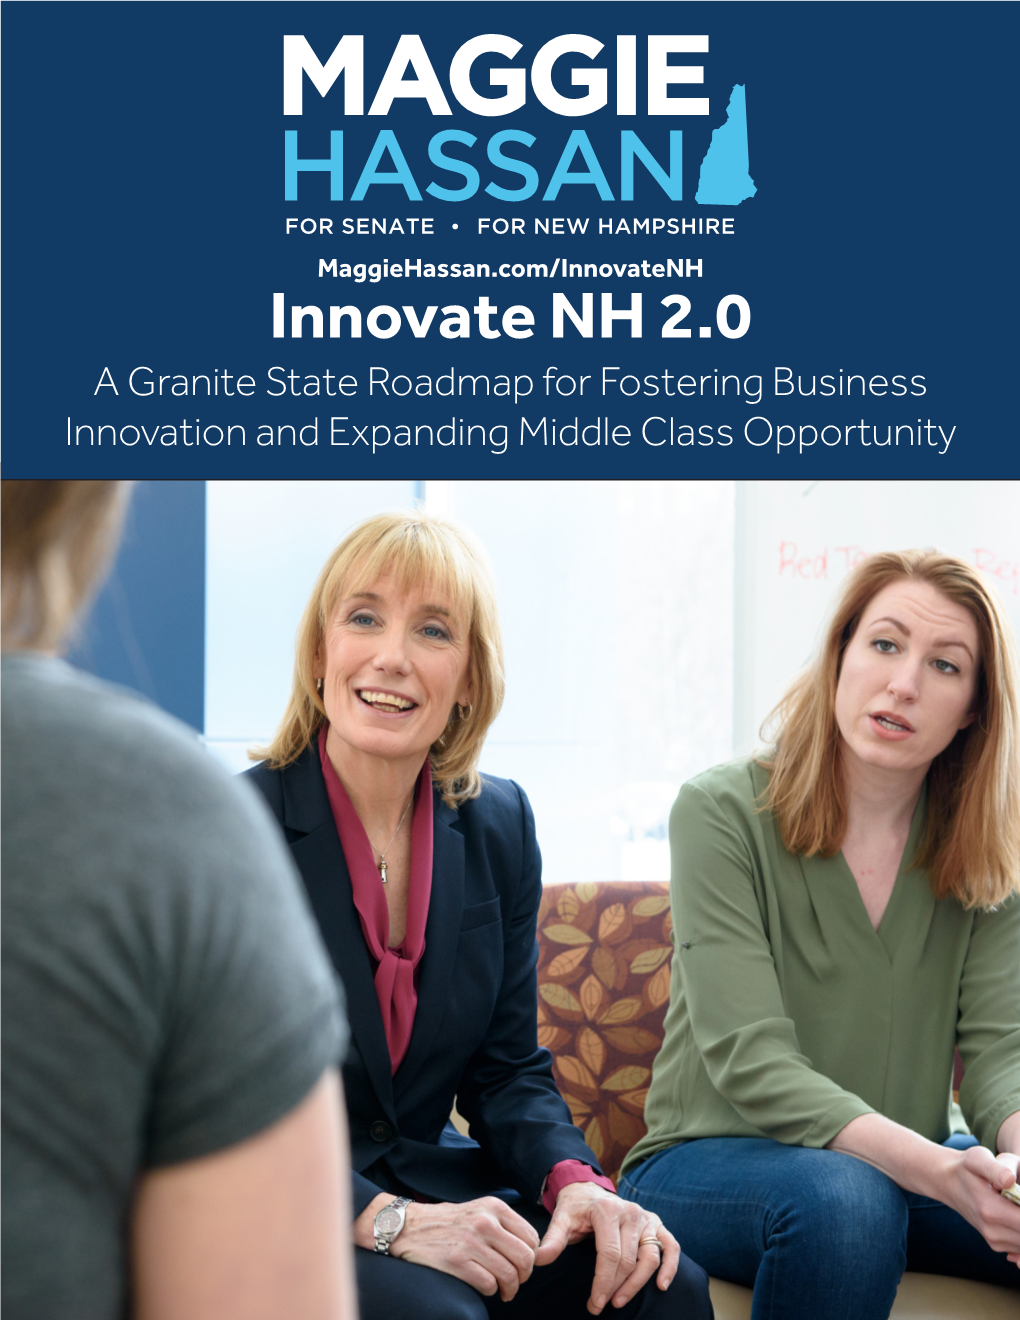 Innovate NH 2.0 a Granite State Roadmap for Fostering Business Innovation and Expanding Middle Class Opportunity